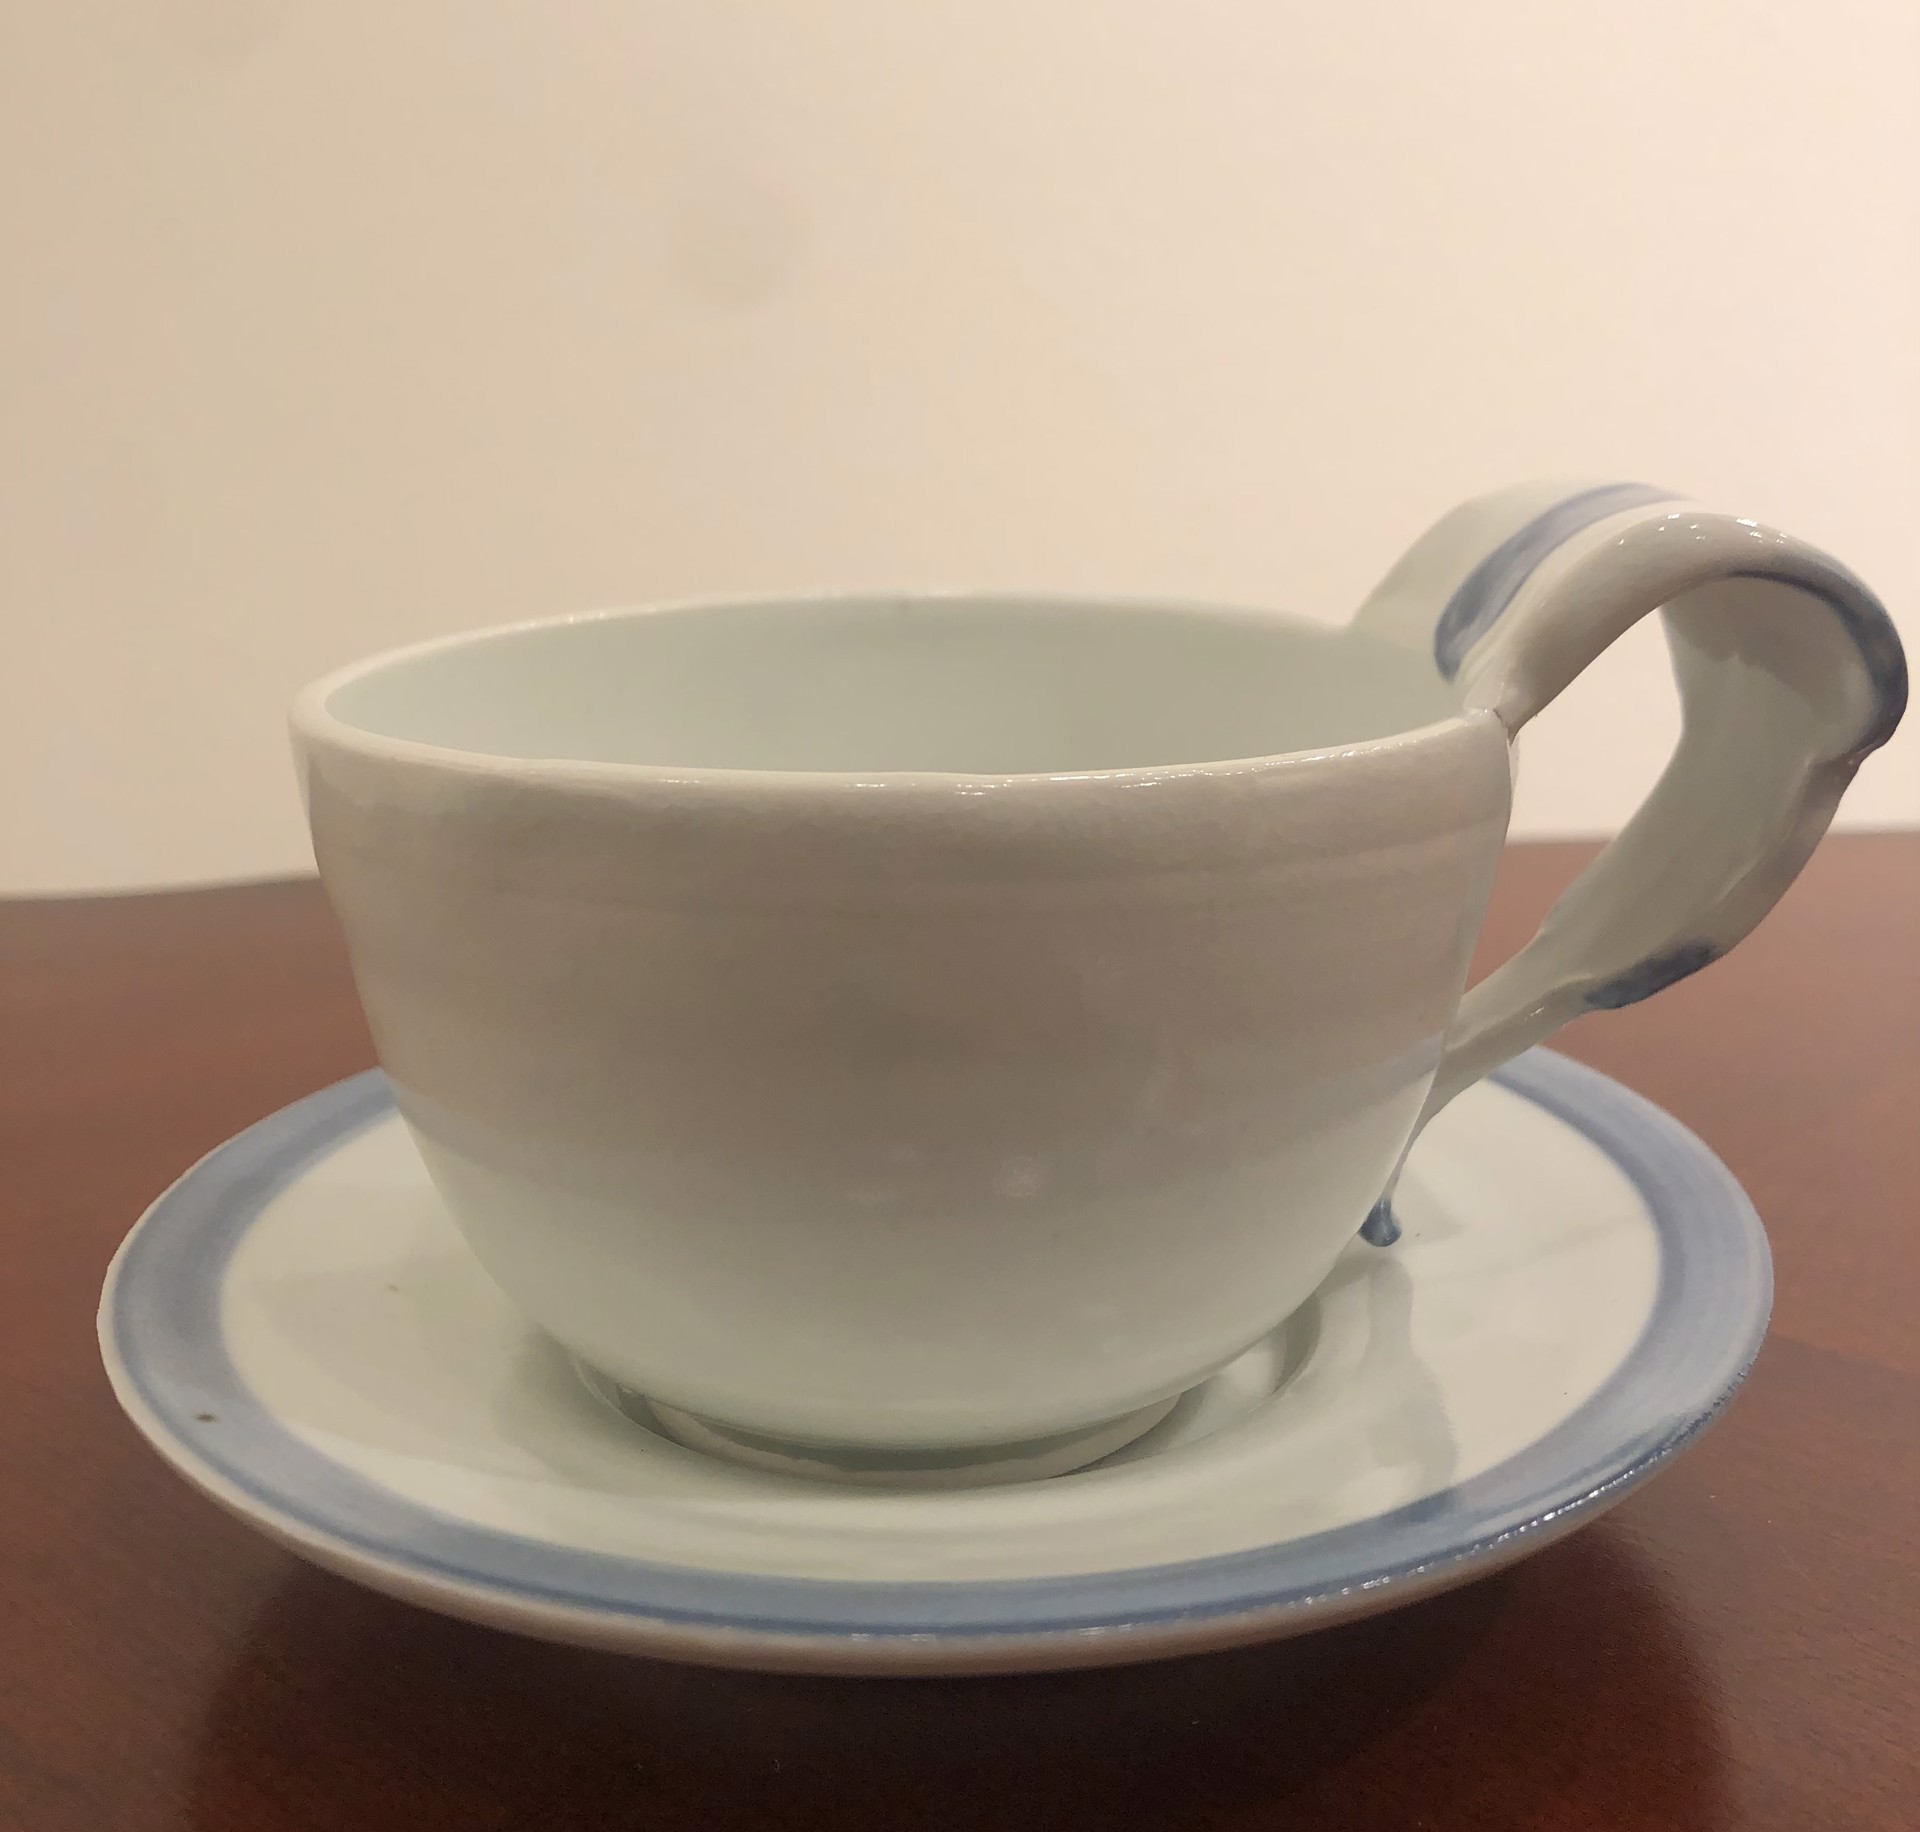 Teacup, porcelain cup and saucer by Monica Plank